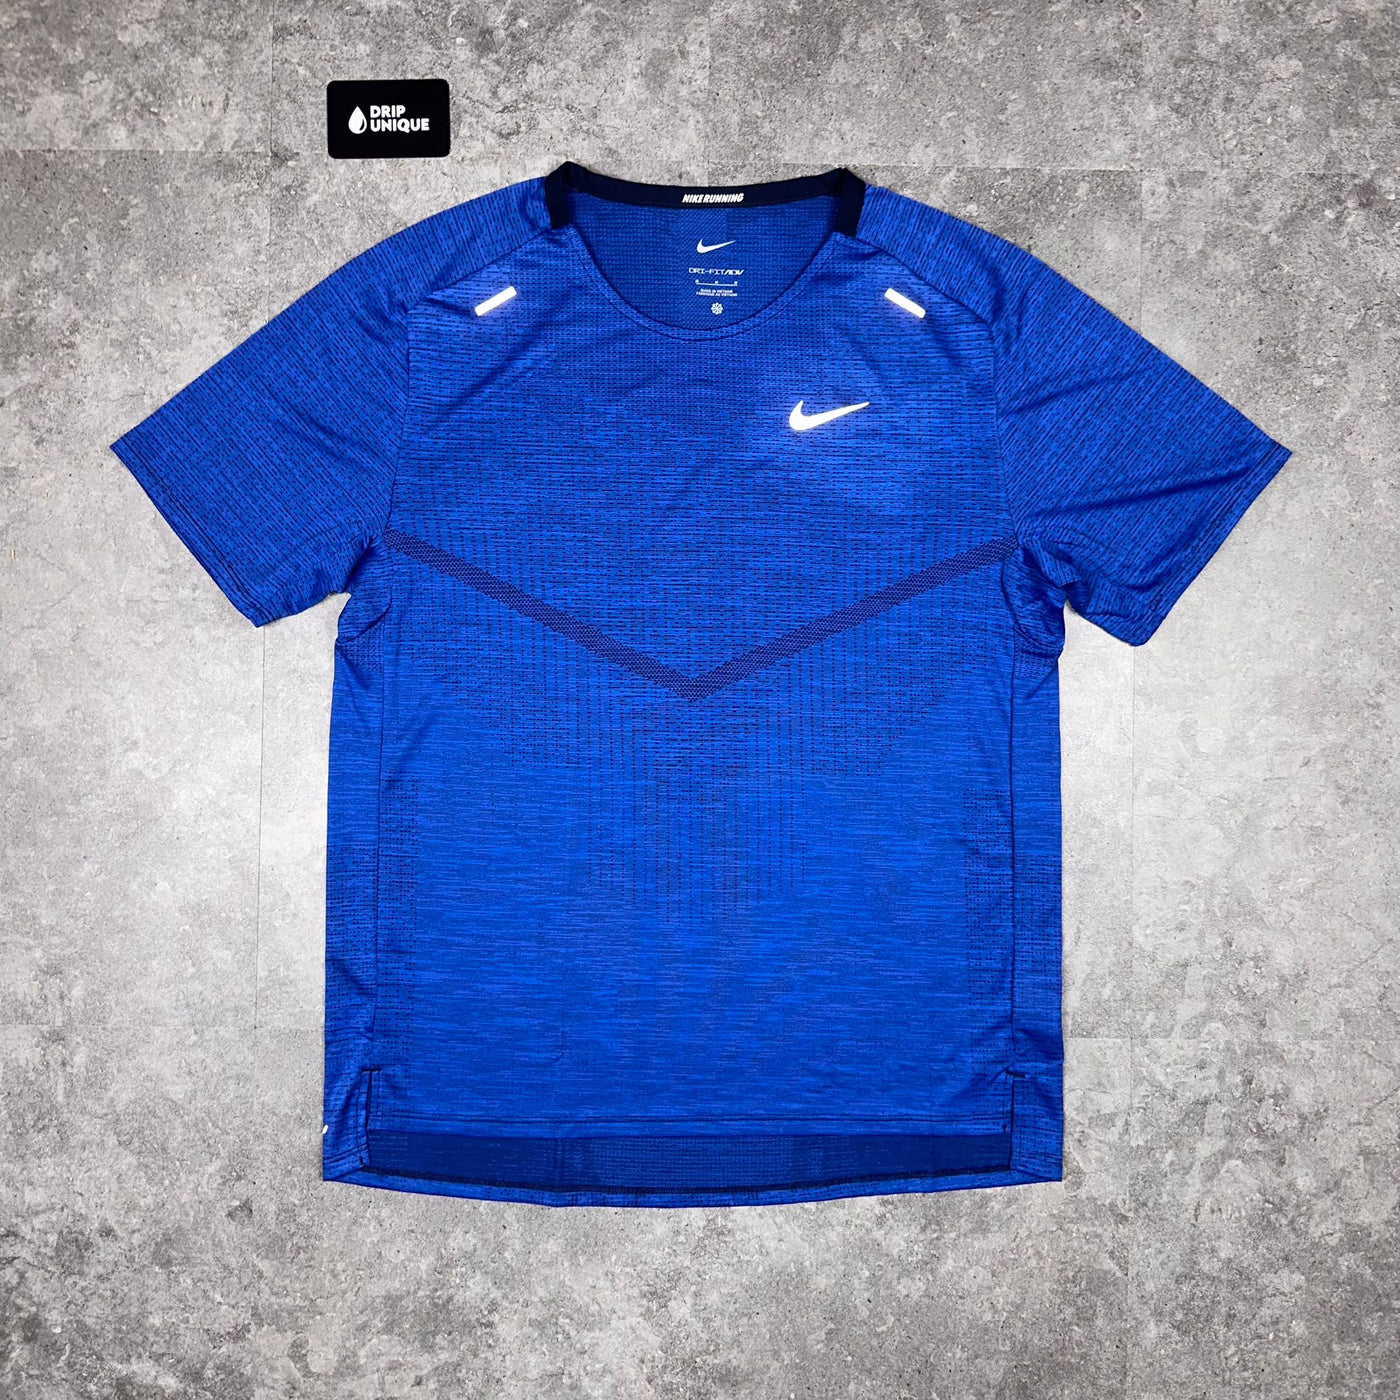 Nike Drip T-shirt (all sizes)  Mens casual outfits, Tee shirt